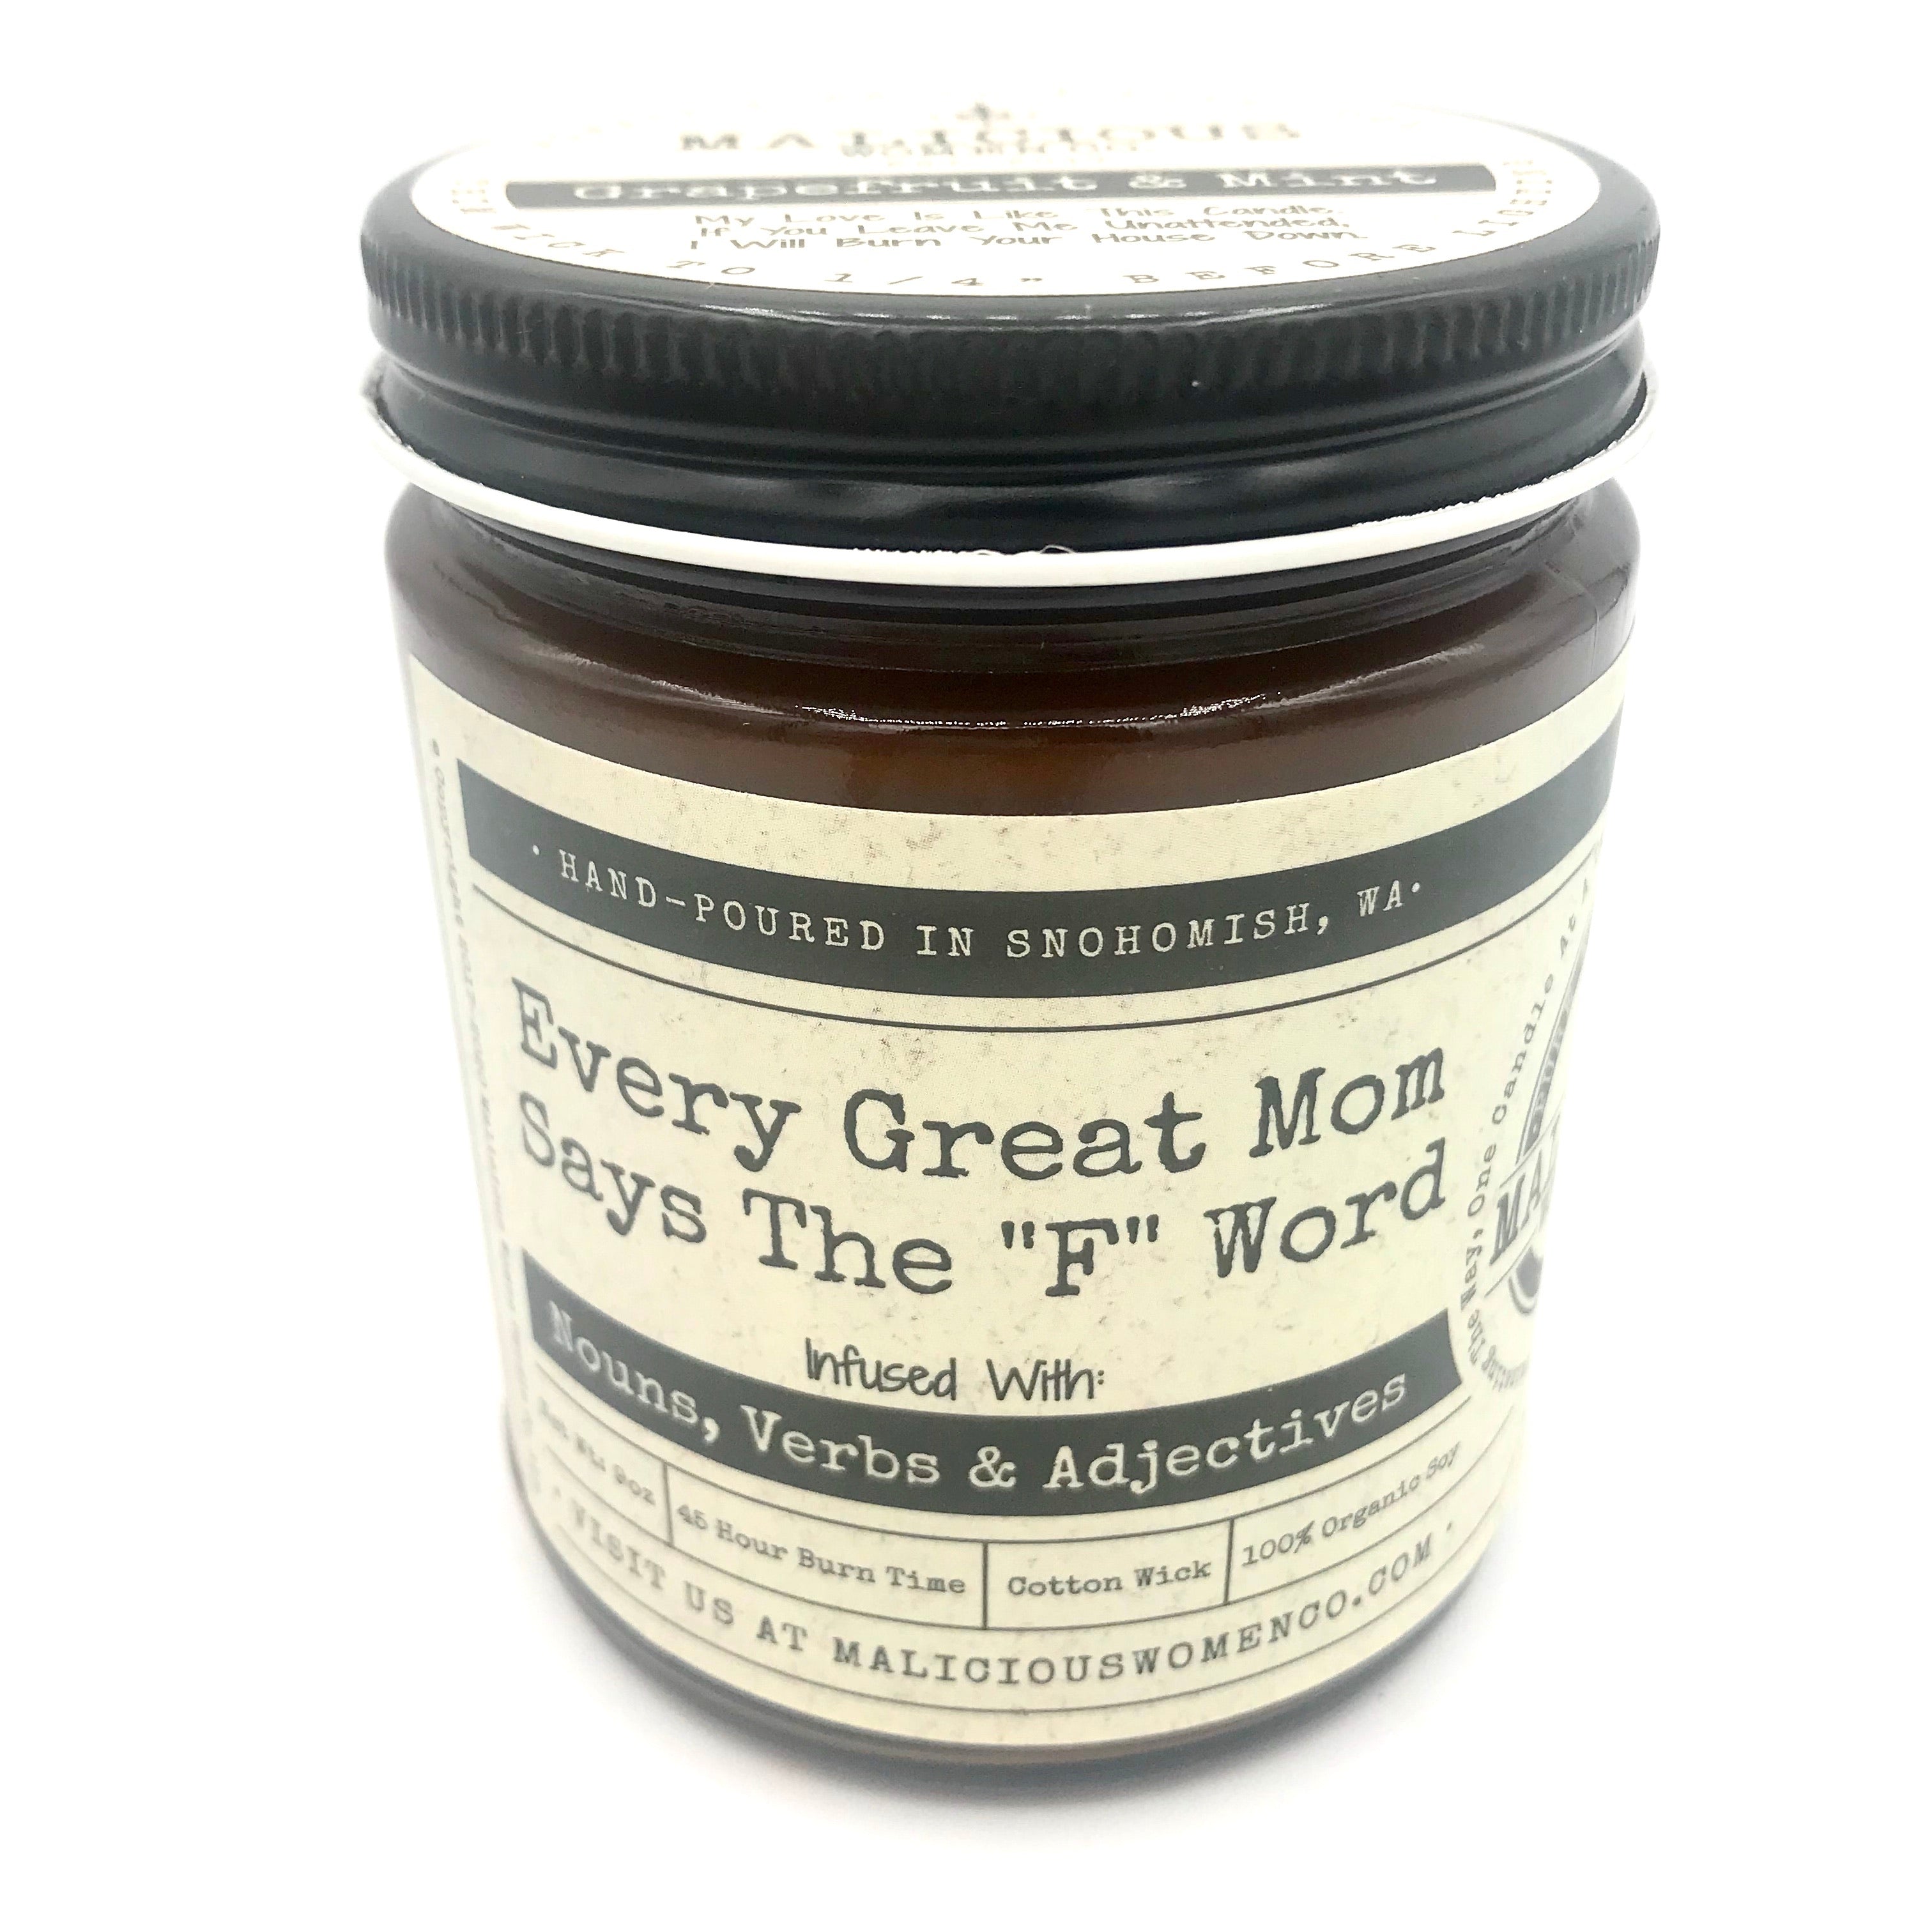 Every Great Mom Says The "F" Word - Infused with "Nouns, Verbs & Adjectives" Scent: Grapefruit & Mint